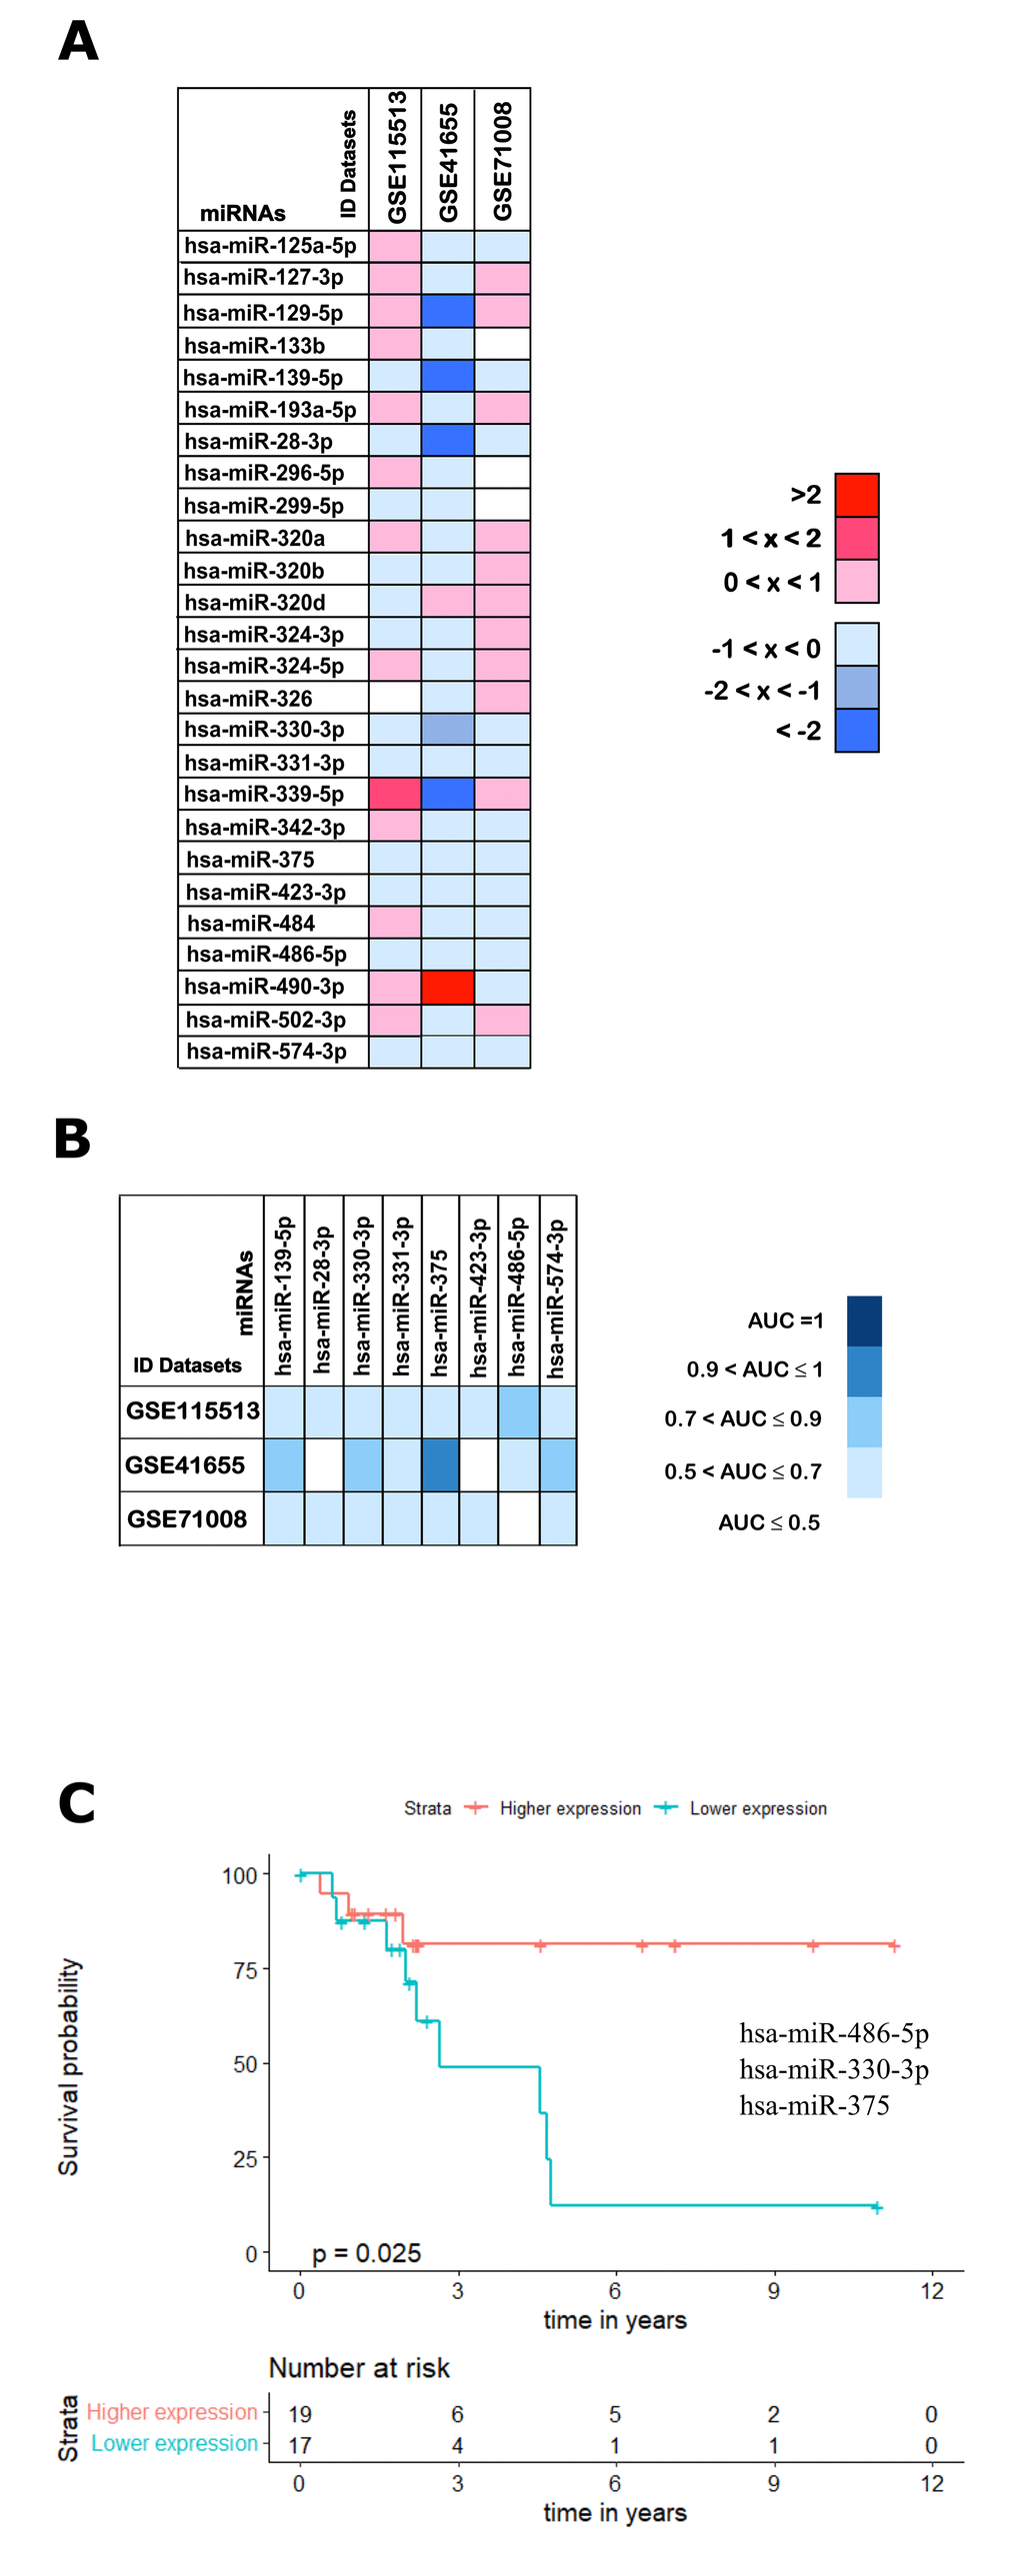 Validation analysis for the 25 downregulated miRNAs in CRC. (A) The log2(FC) values calculated for each dataset are reported with red scale boxes for upregulated miRNAs and blue scale boxes for the downregulated miRNAs. White boxes represent the inexistence of the miRNA on the dataset. (B) The miRNAs AUC values in each of the datasets GSE115513, GSE41655 and GSE71008 are reported as blue scale boxes. MiRNAs with AUC = 1 were considered perfect diagnostic biomarkers, 0.9 C) Stage III OS Kaplan-Meier curve based on miR-486-5p - miR-330-3p - miR-375 (p-value = 0.025, Log rank test; HR= 4.01). Time is represented in years. Higher (in red) and Lower (in blue) expression groups represent the group of patients with miRNA expression above and below miRNAs median expression, respectively. Censored data is represented by small plus signs in each group. The number of patients at risk for each group and per time point is shown in the table below each graph. HR, hazard ratio.